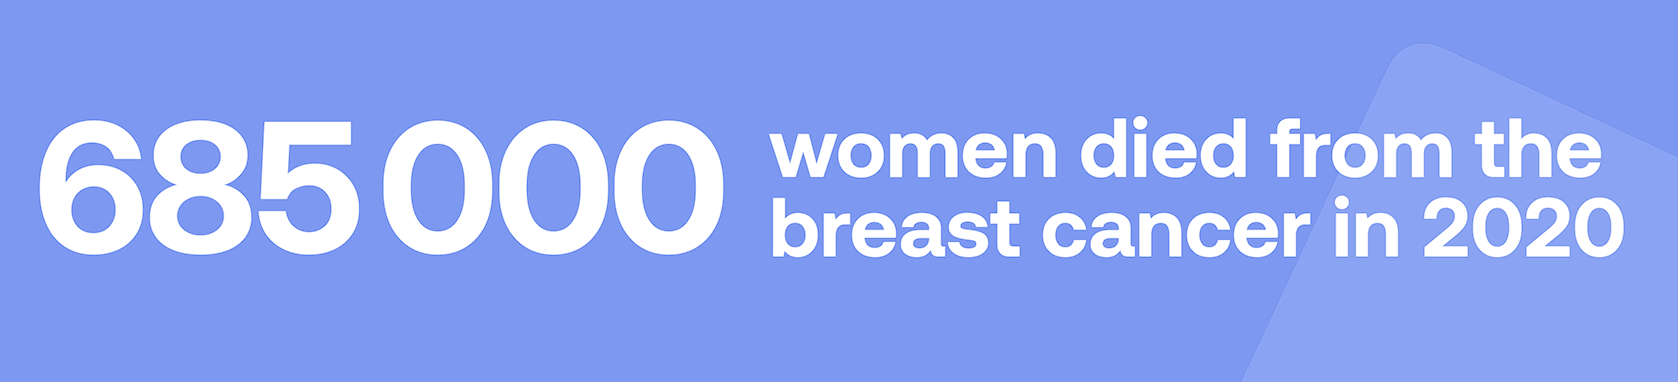 685000 women died from the breast cancer in 2020